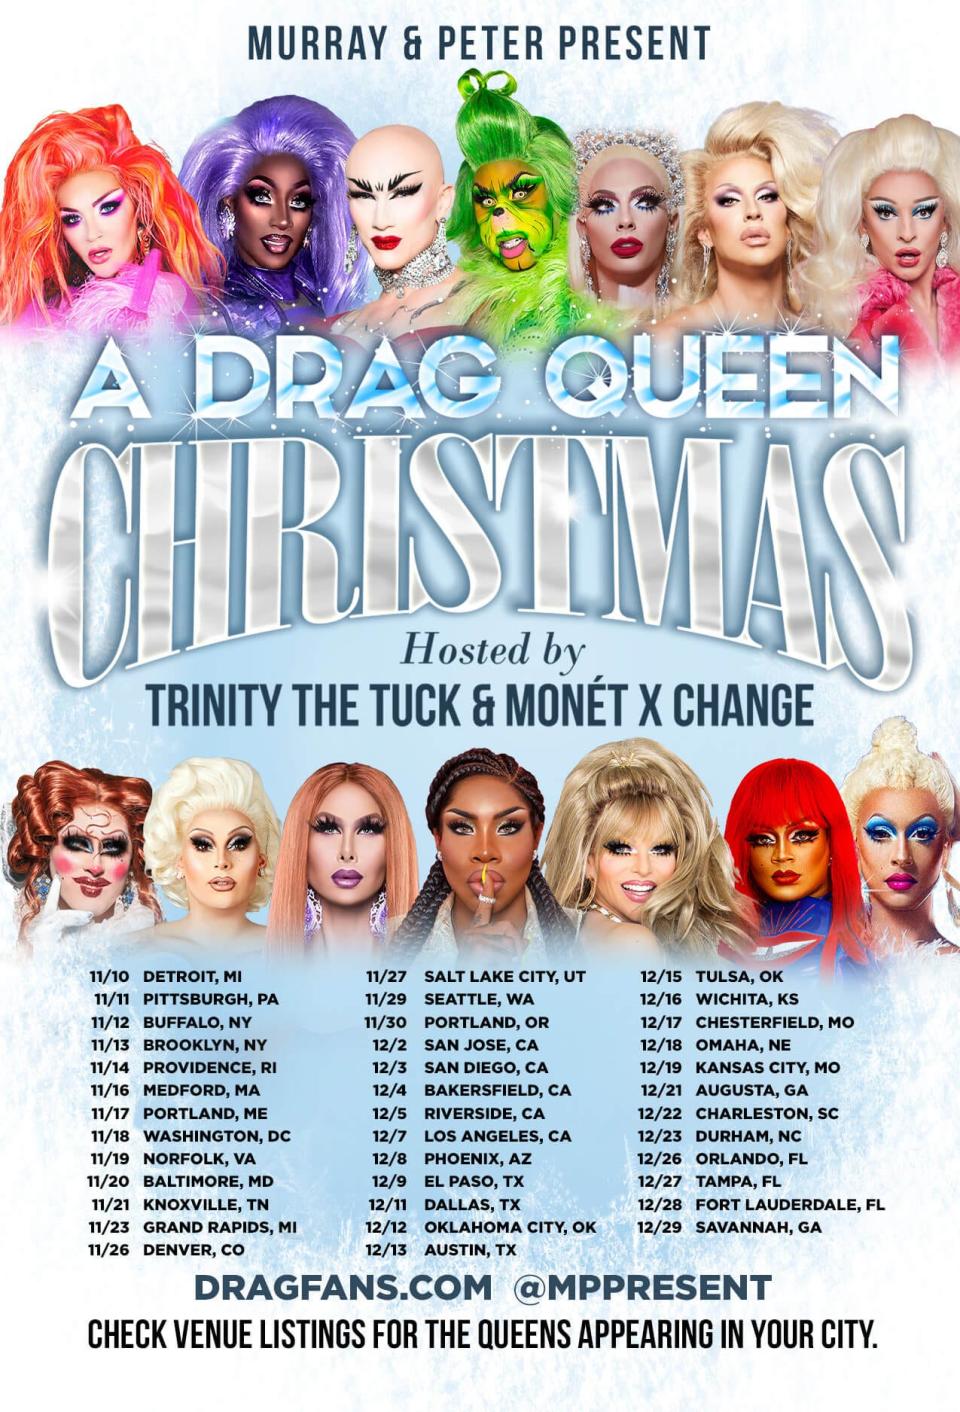 Promotion flyer for "A Drag Queen Christmas."